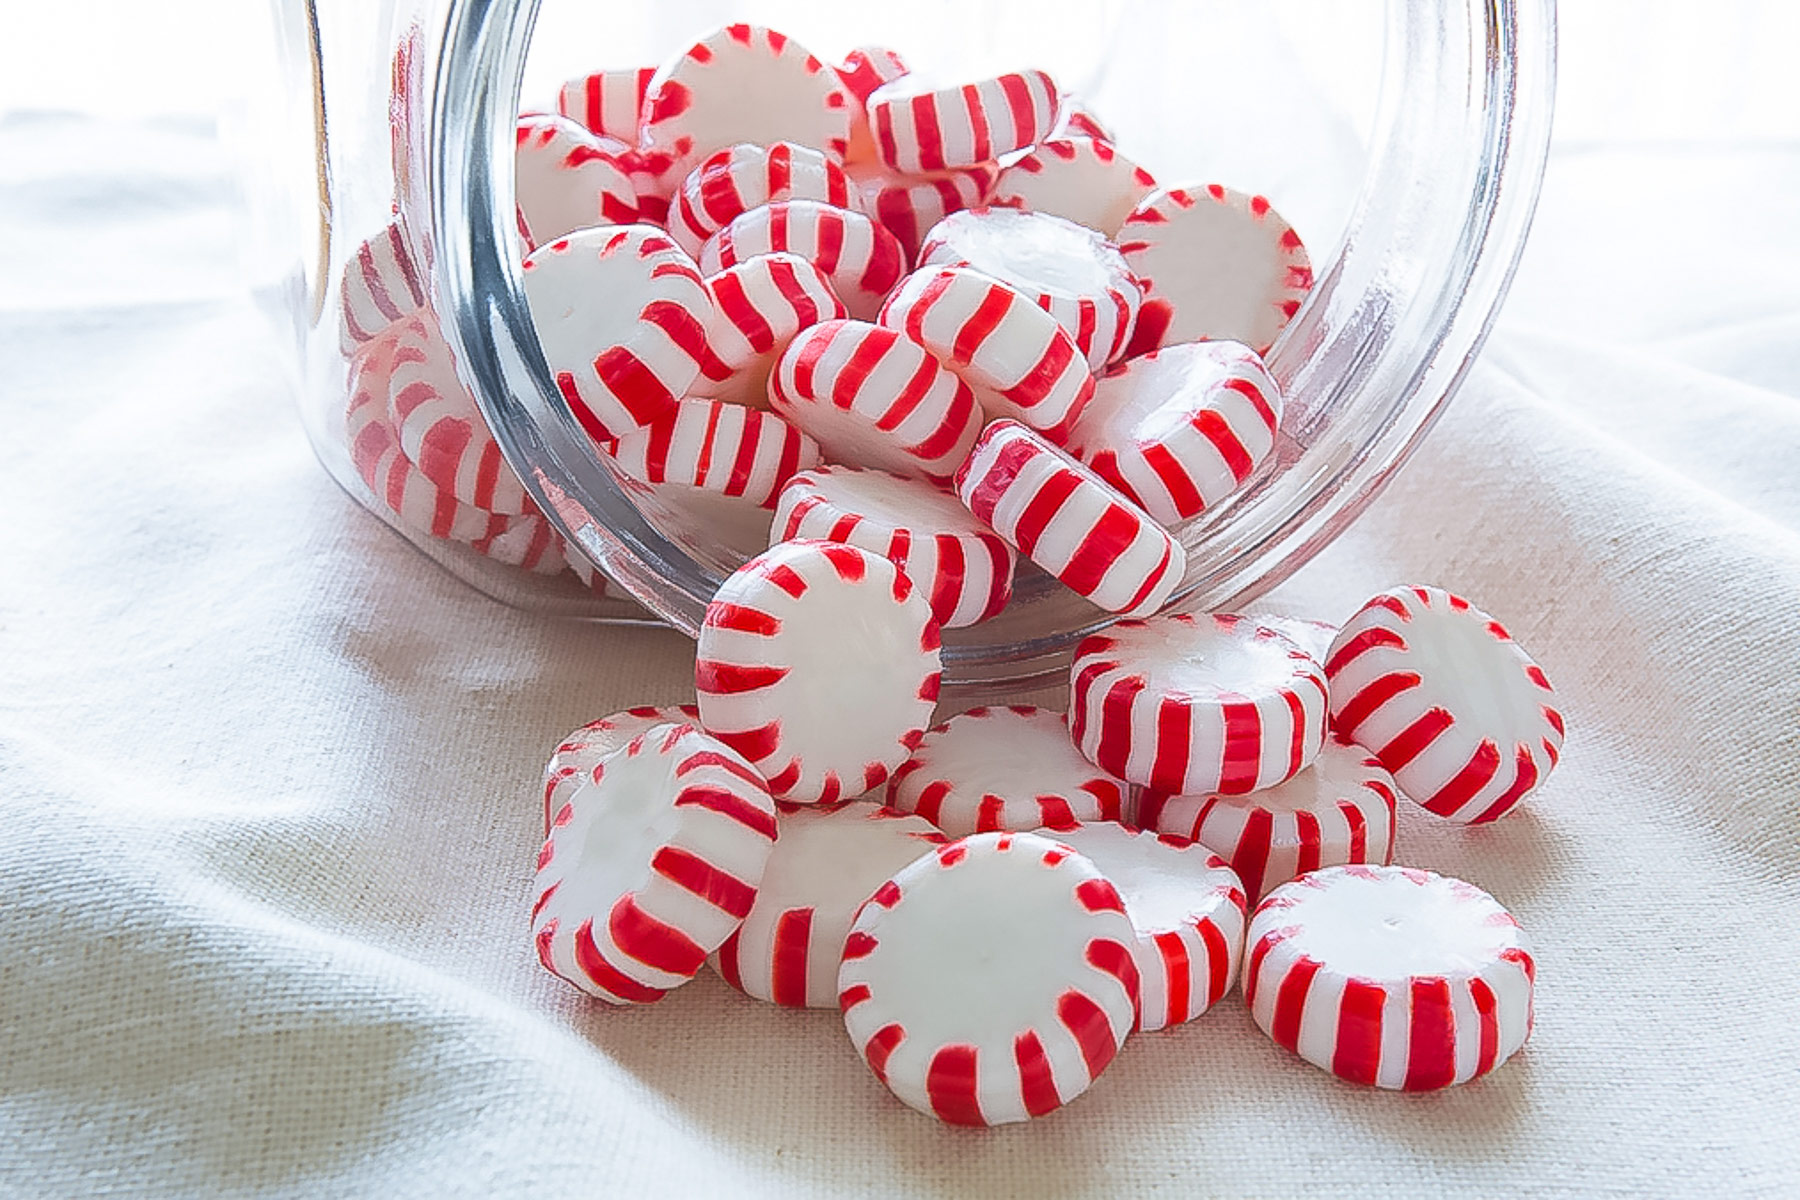 Jar of peppermint candies spilling out of a jar onto the table.